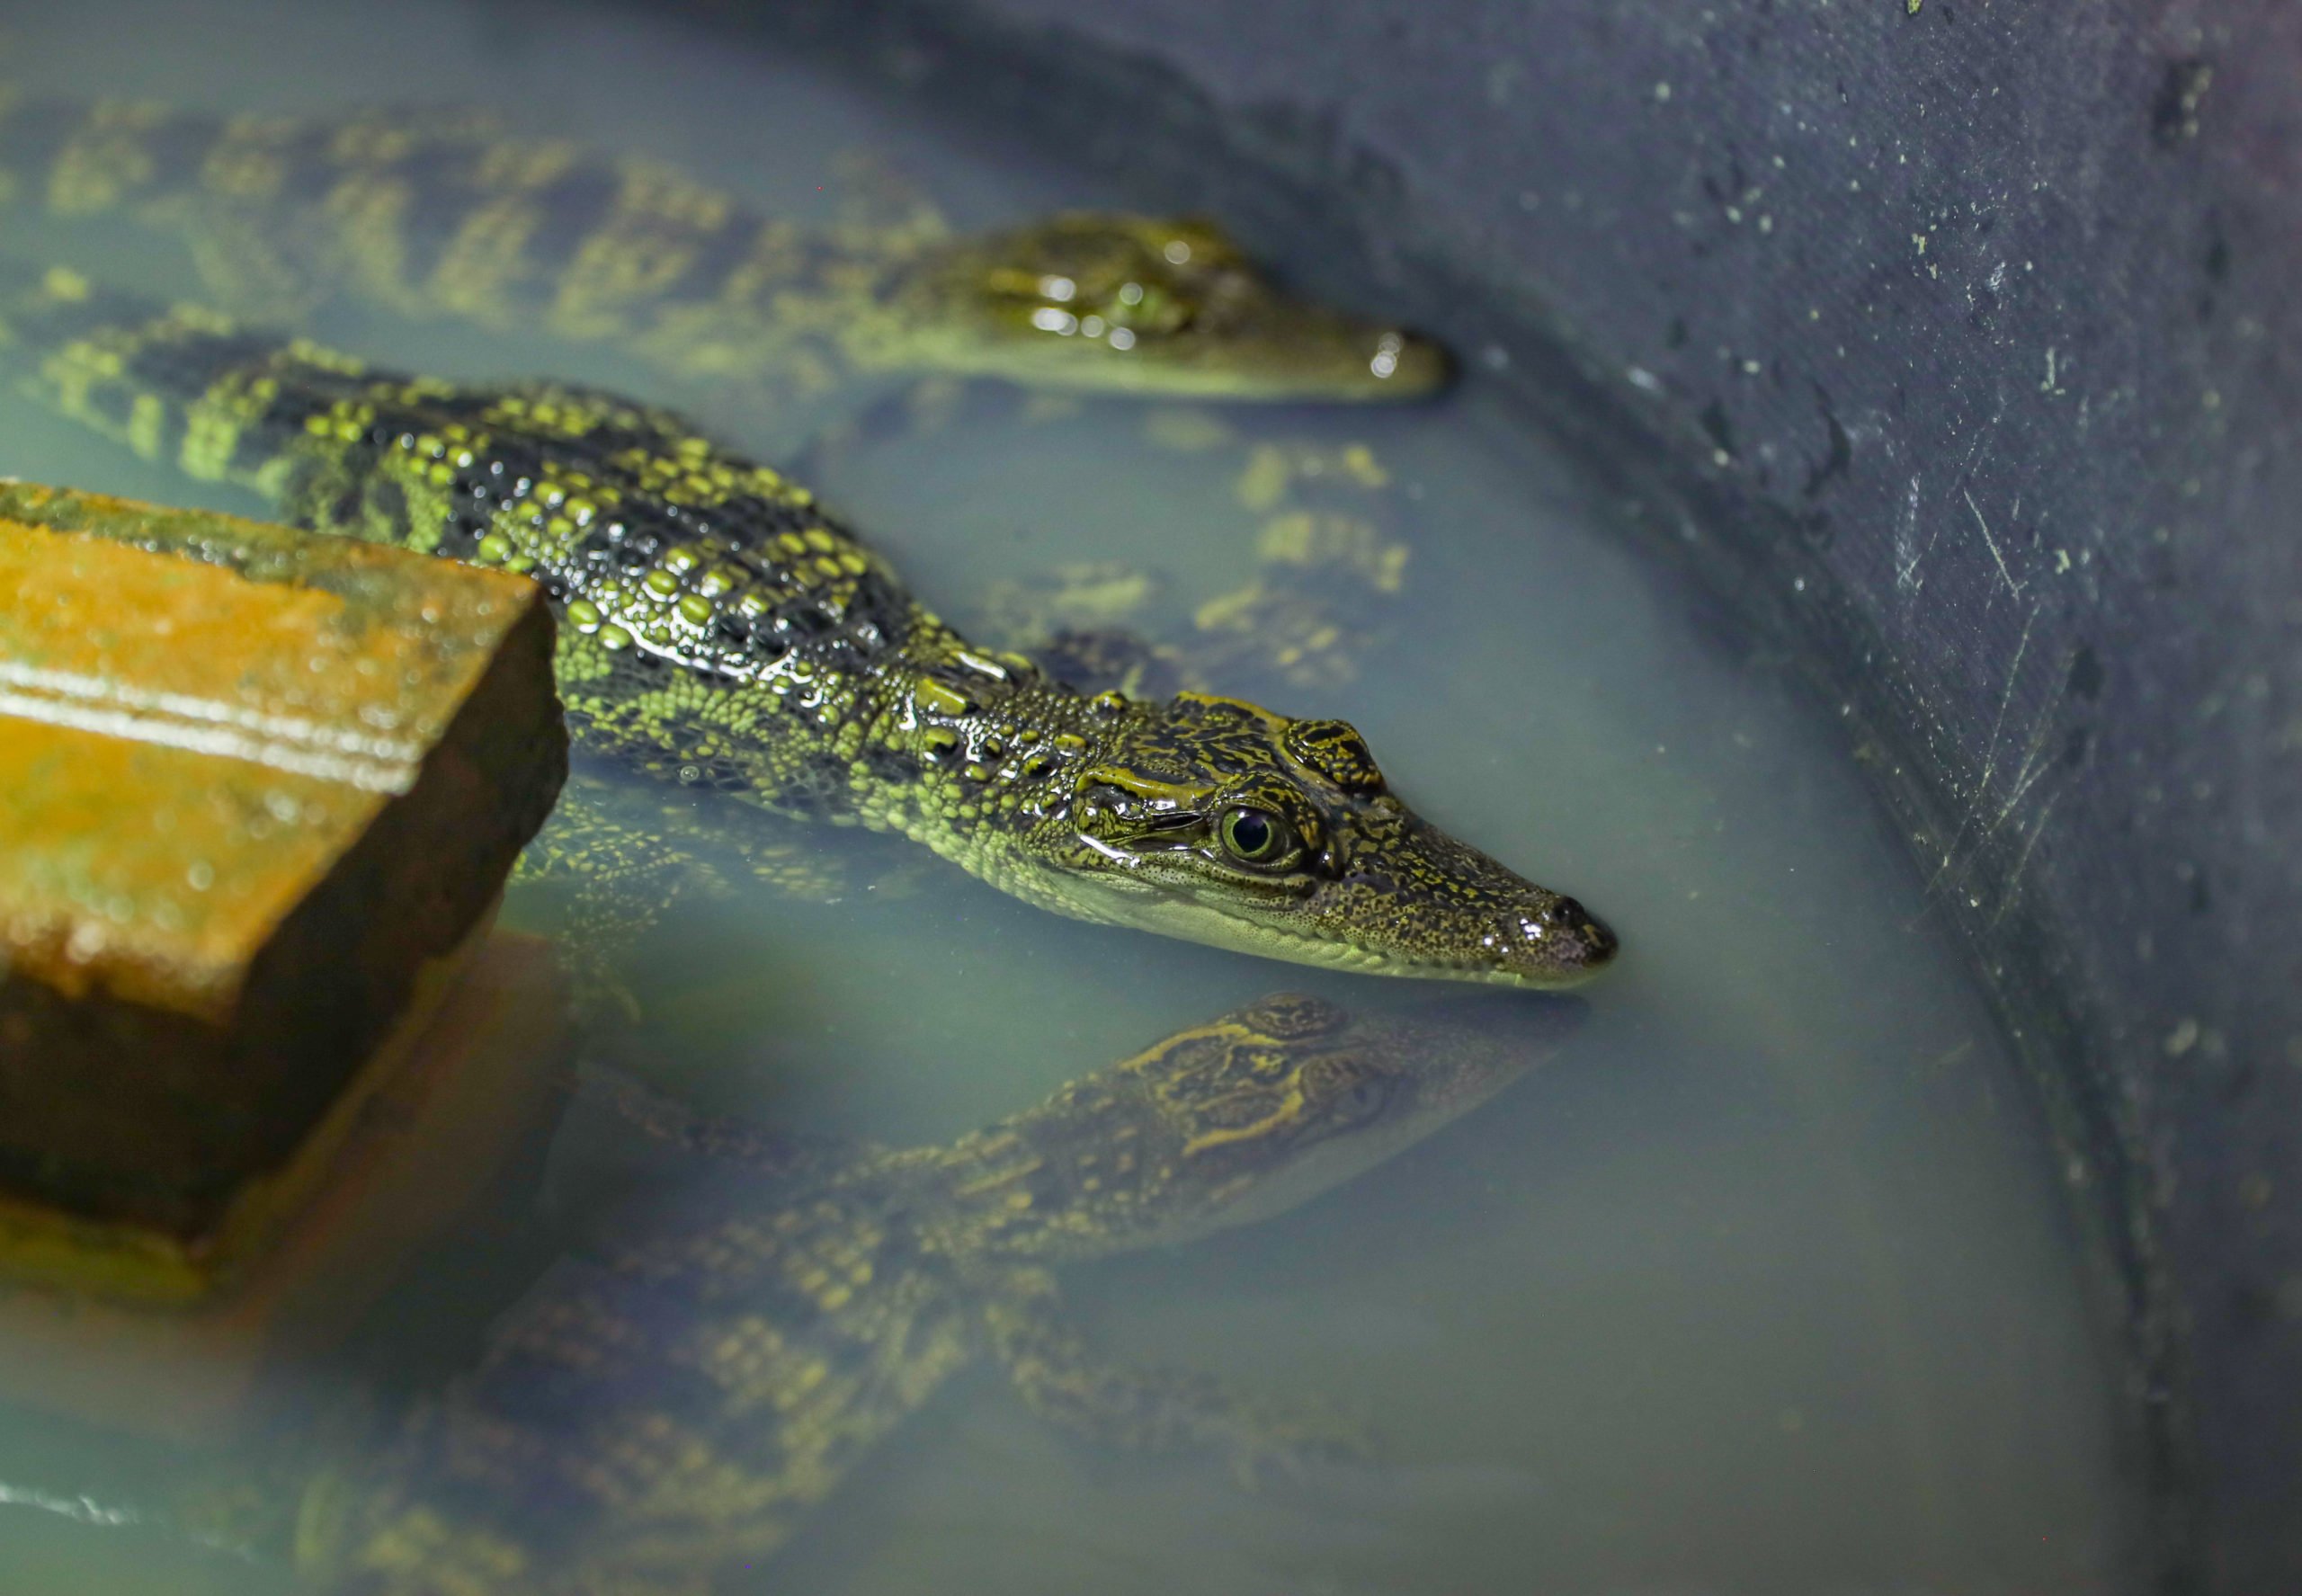 Siamese crocodile hatchlings, under a year old, at the Siamese Crocodile Breeding Facility in Phnom Tamao Wildlife Rescue Center. There are 12 hatchlings at the facility as of February 2022. 